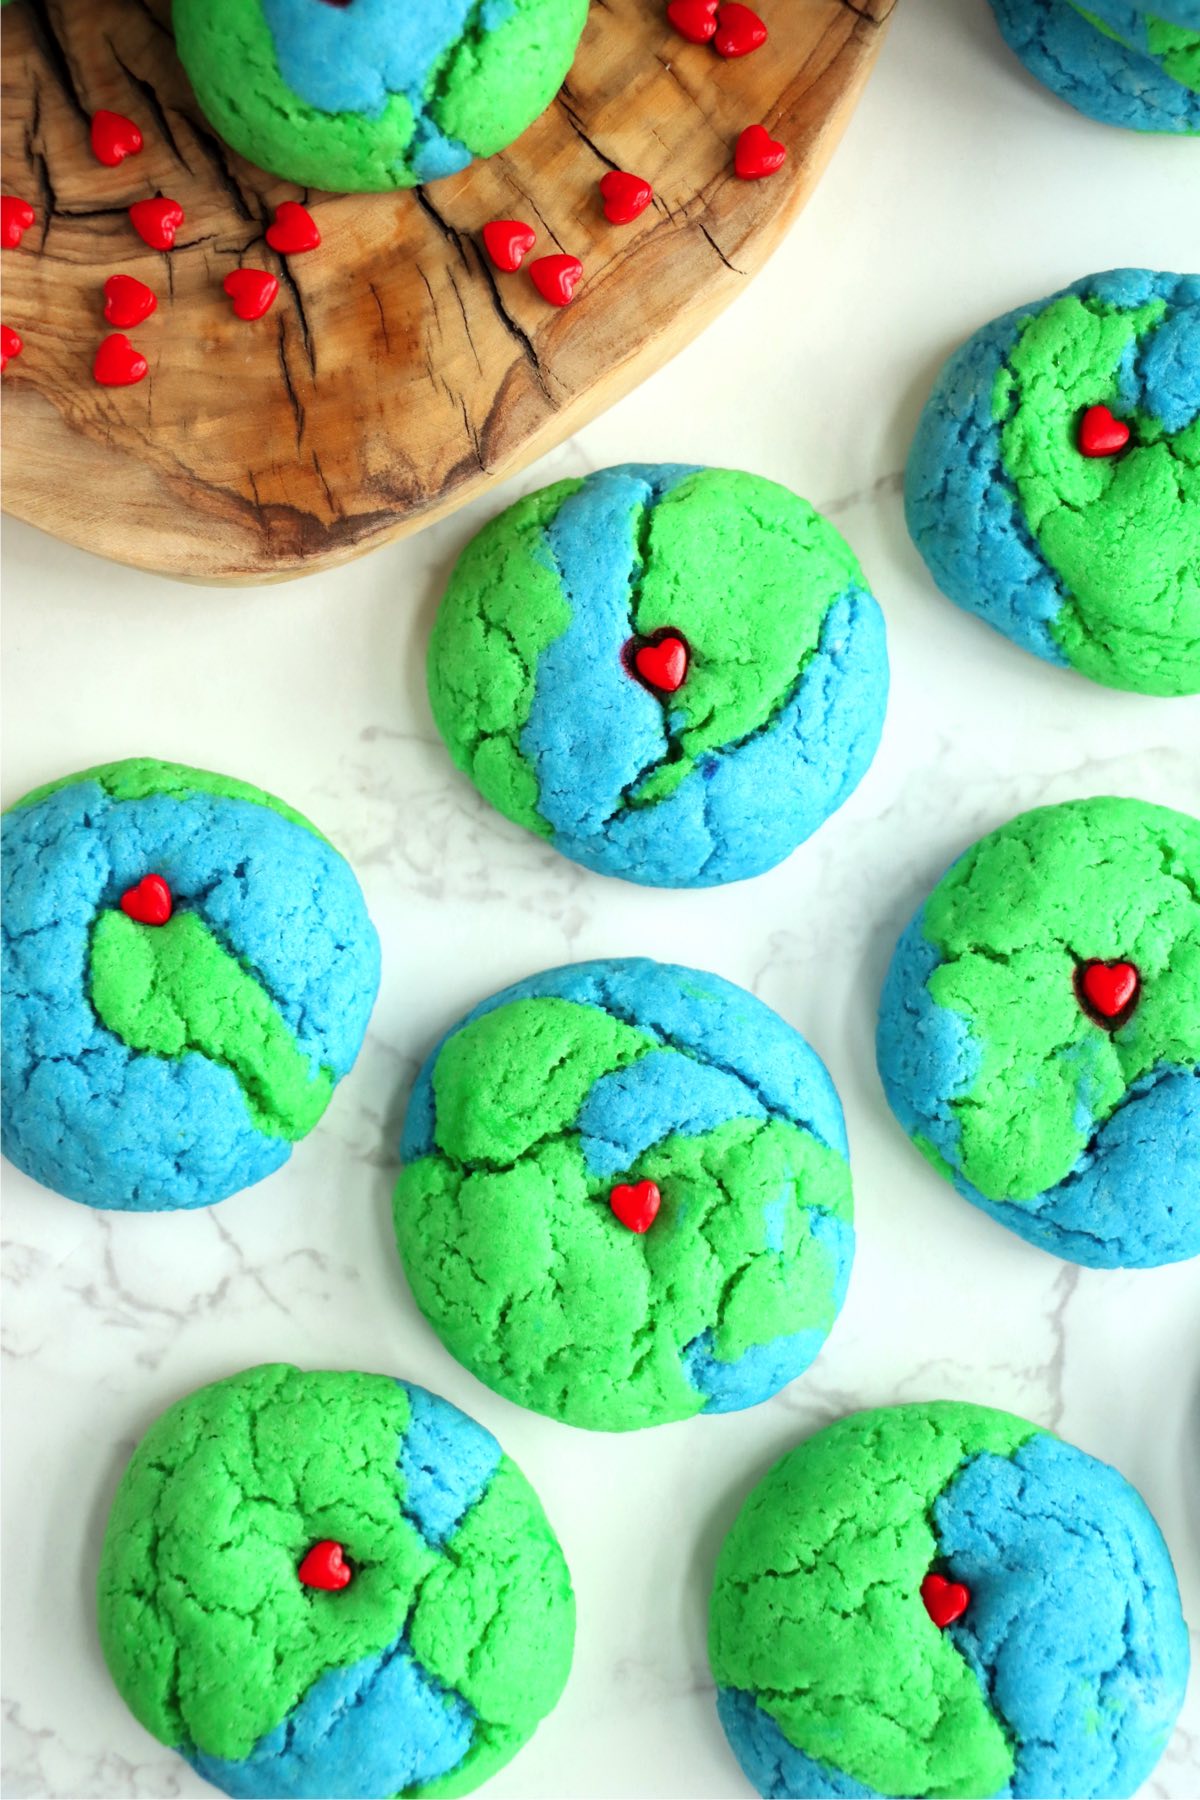 Earth Day cookies cooling on a white marble countertop